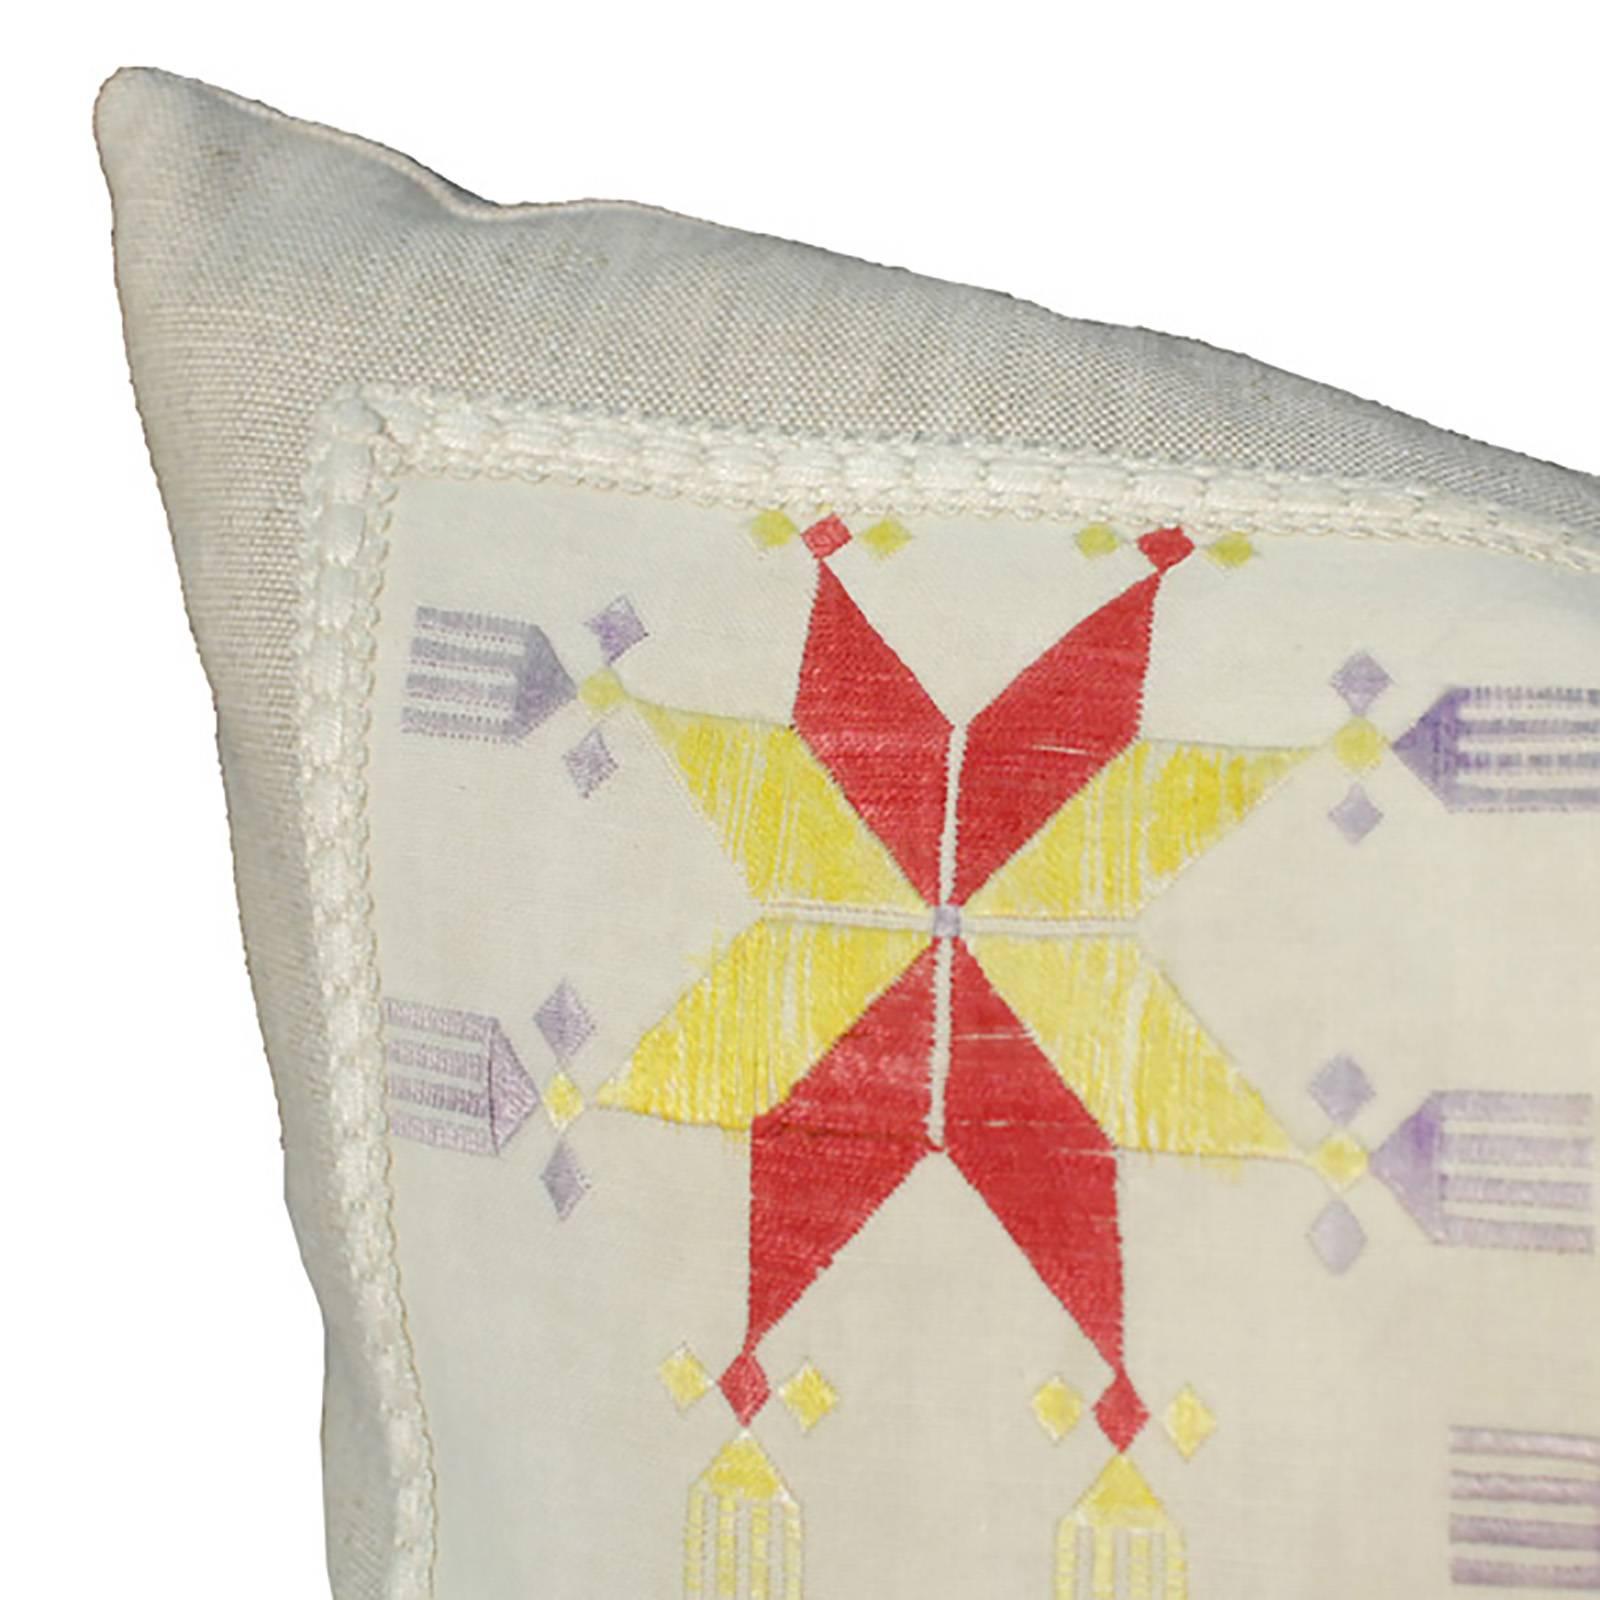 Embroidered Throw Pillow with Vintage Central Asian Embroidery, c. 1900 For Sale